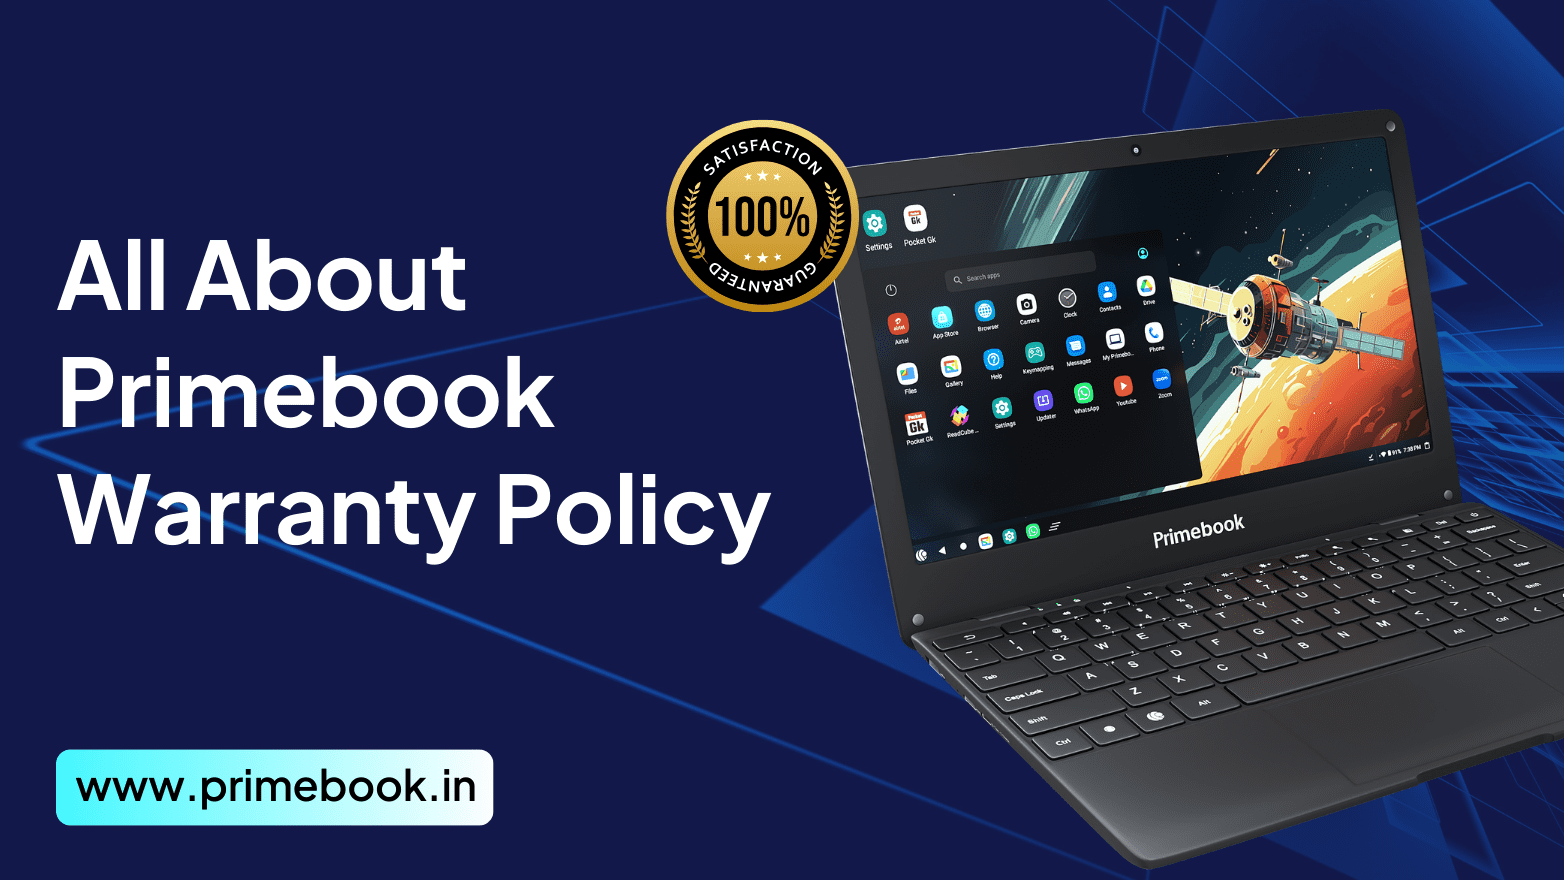 What Does The Primebook Warranty Policy Cover? 